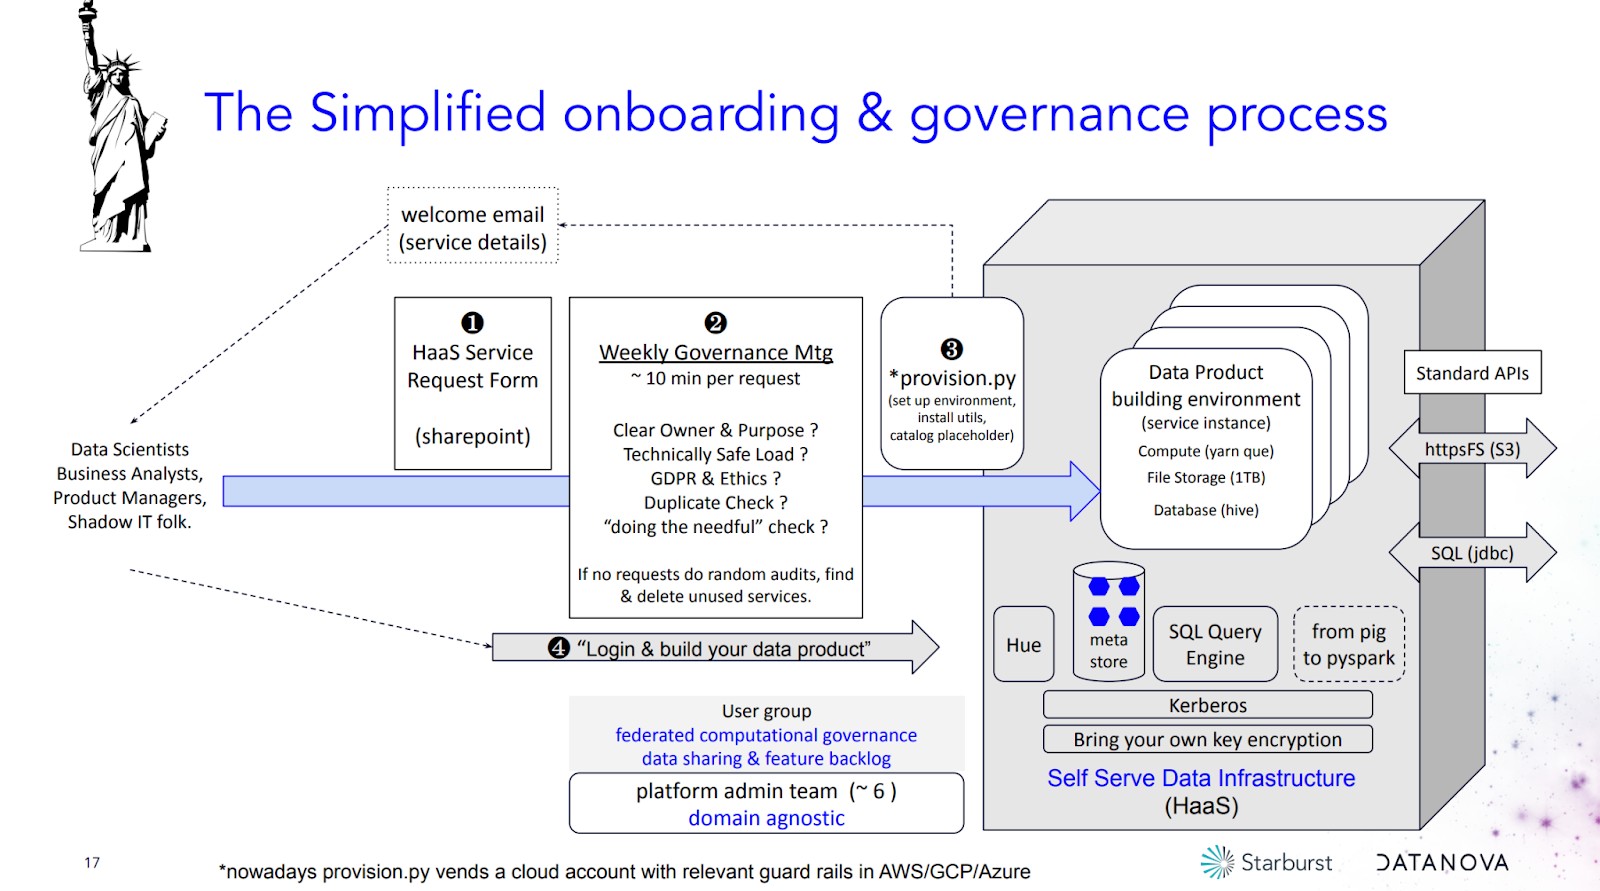 Onboarding and governance process diagram